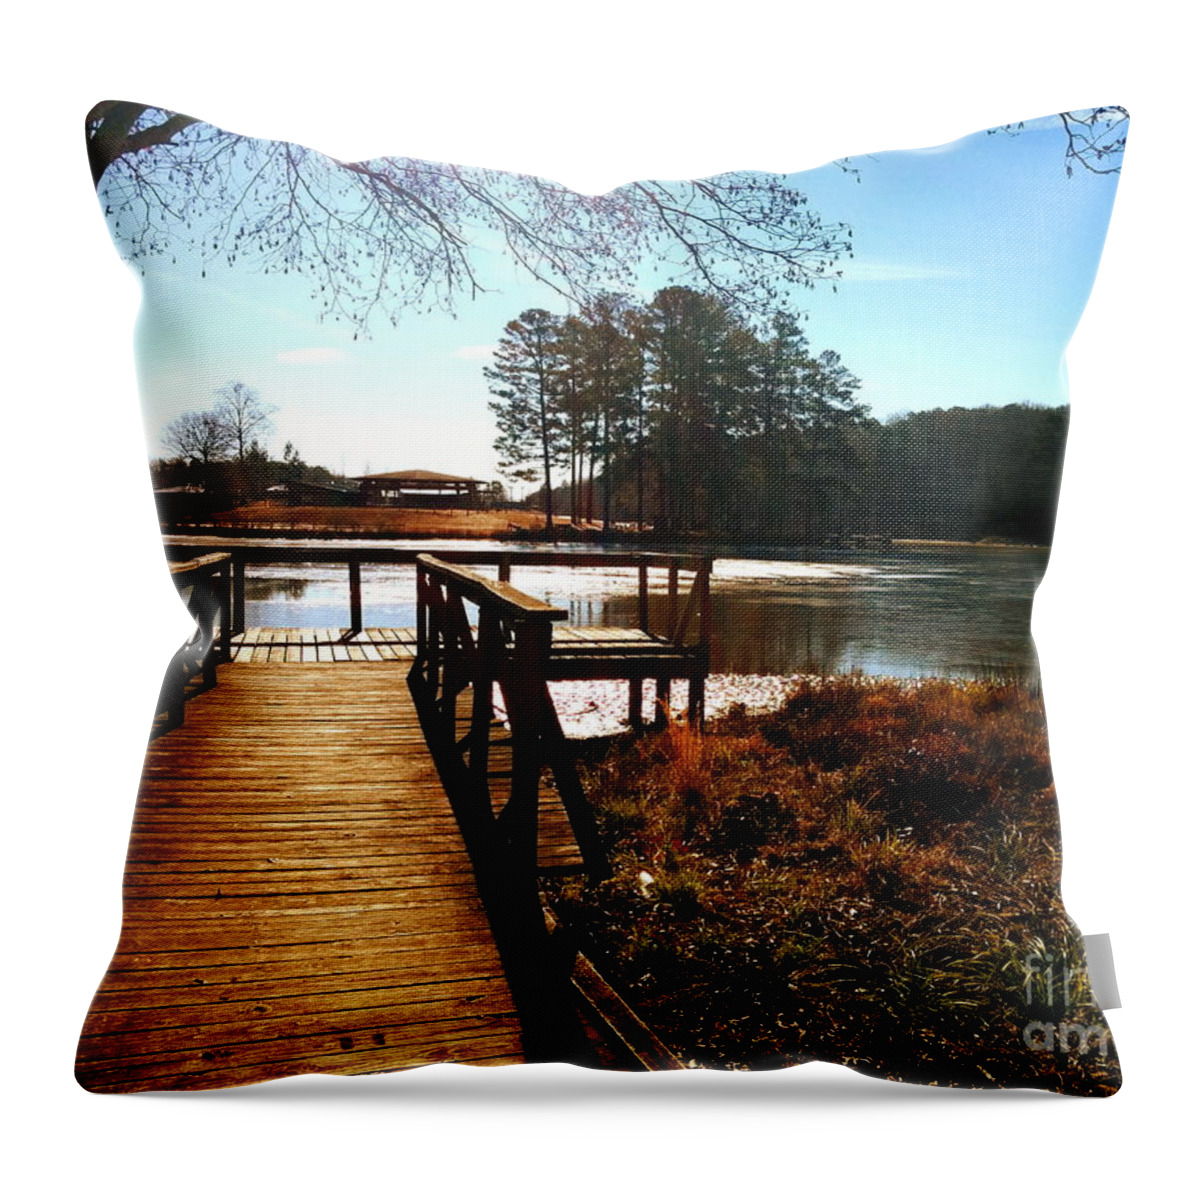 Boardwalk Throw Pillow featuring the photograph Fort Yargo Boardwalk by Cat Rondeau